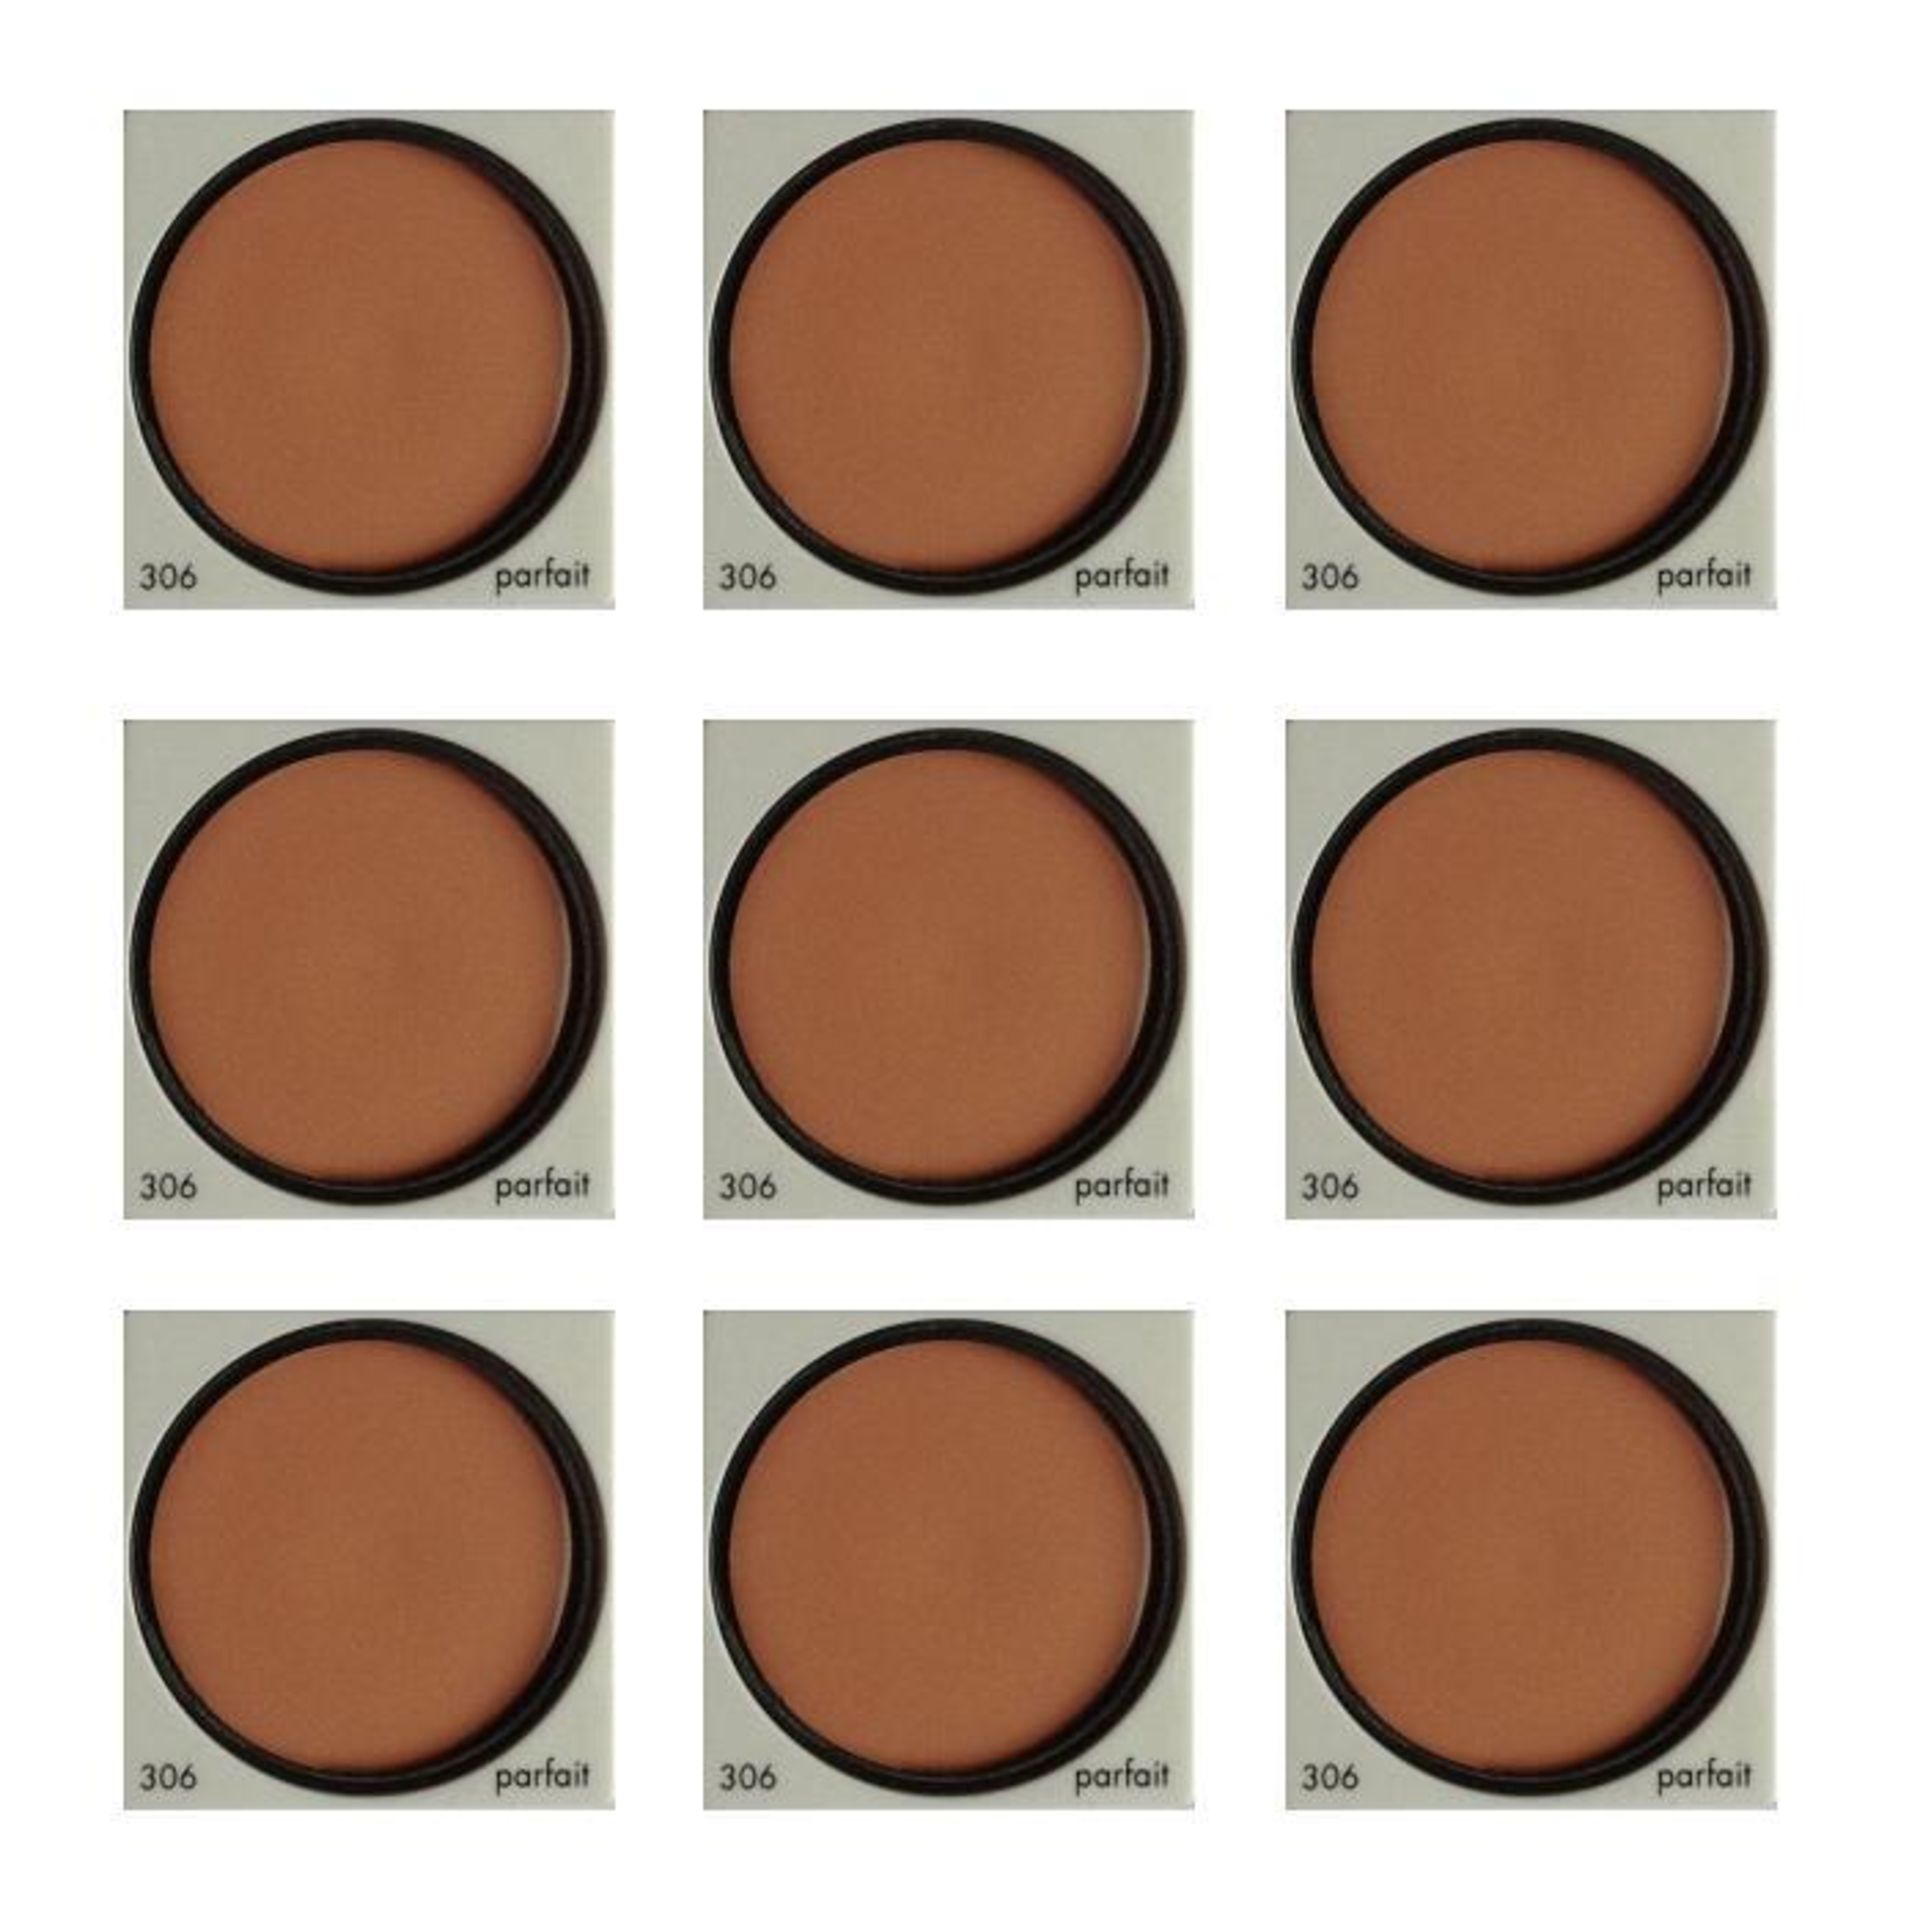 200 x Calvin Klein Creme Powder Foundation Testers Full Size – 2 Shades – UK Delivery £15 – NO VAT